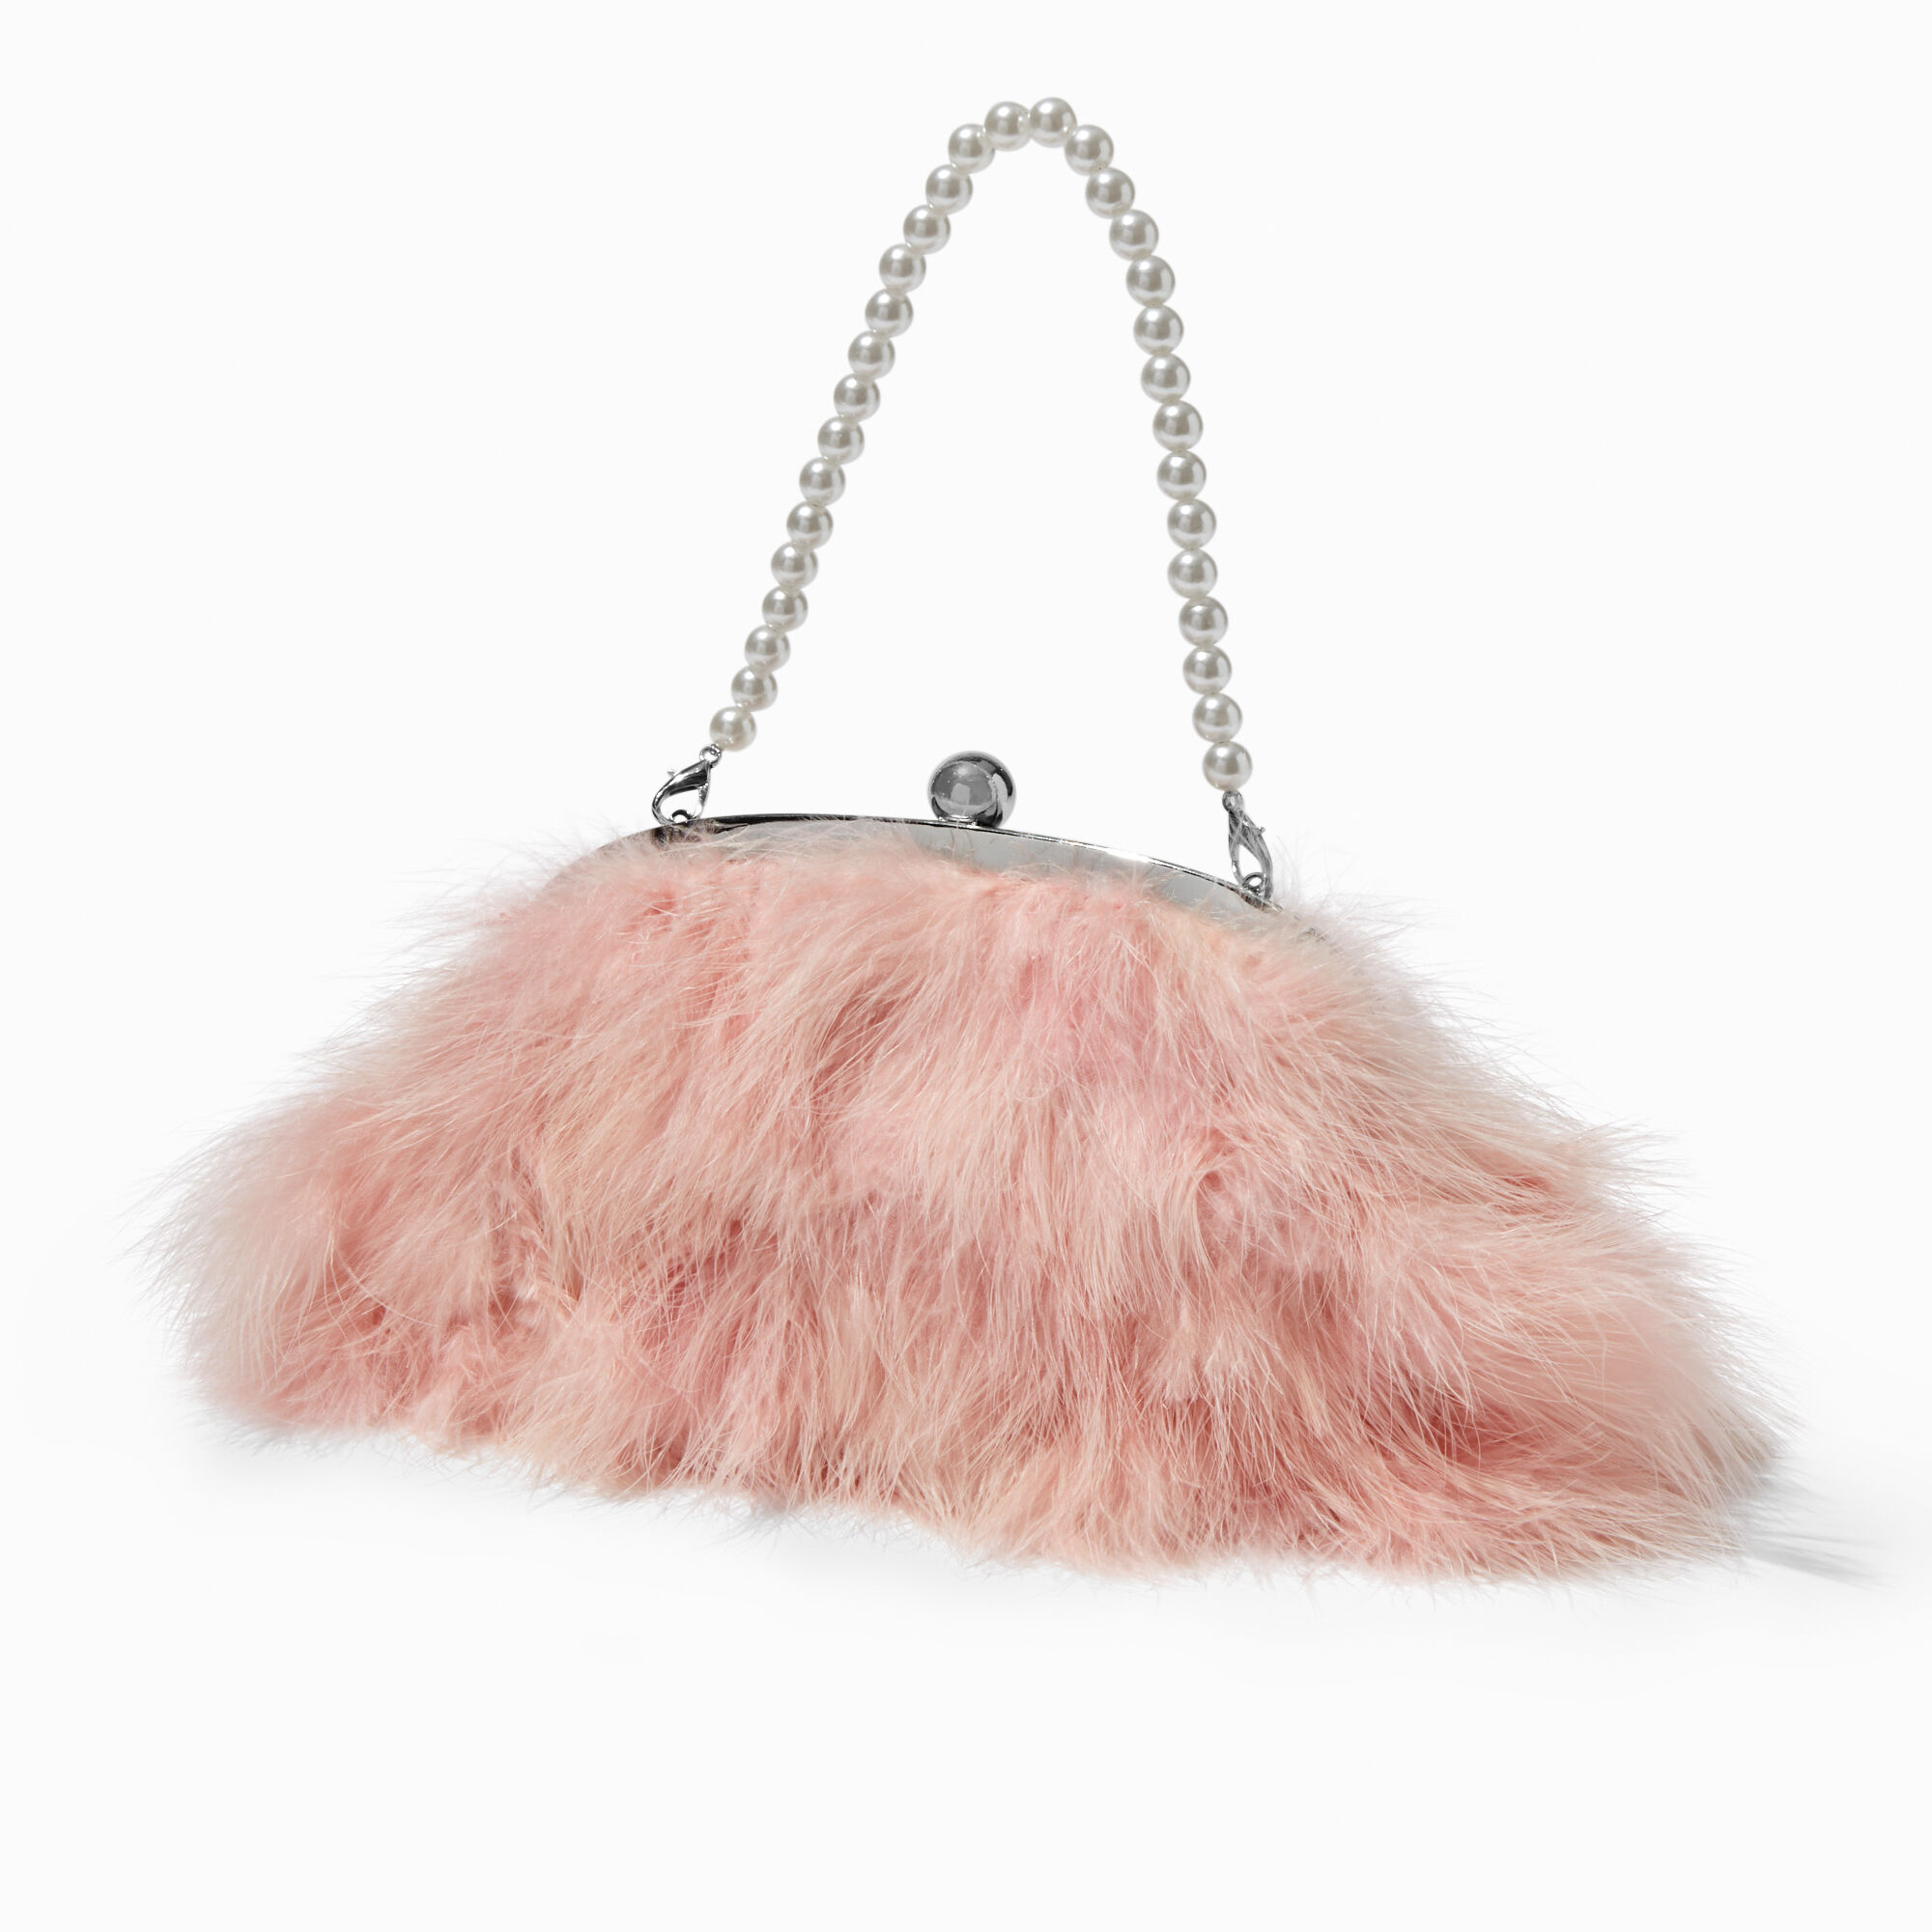 View Claires Blush Feathery Shoulder Bag Pink information